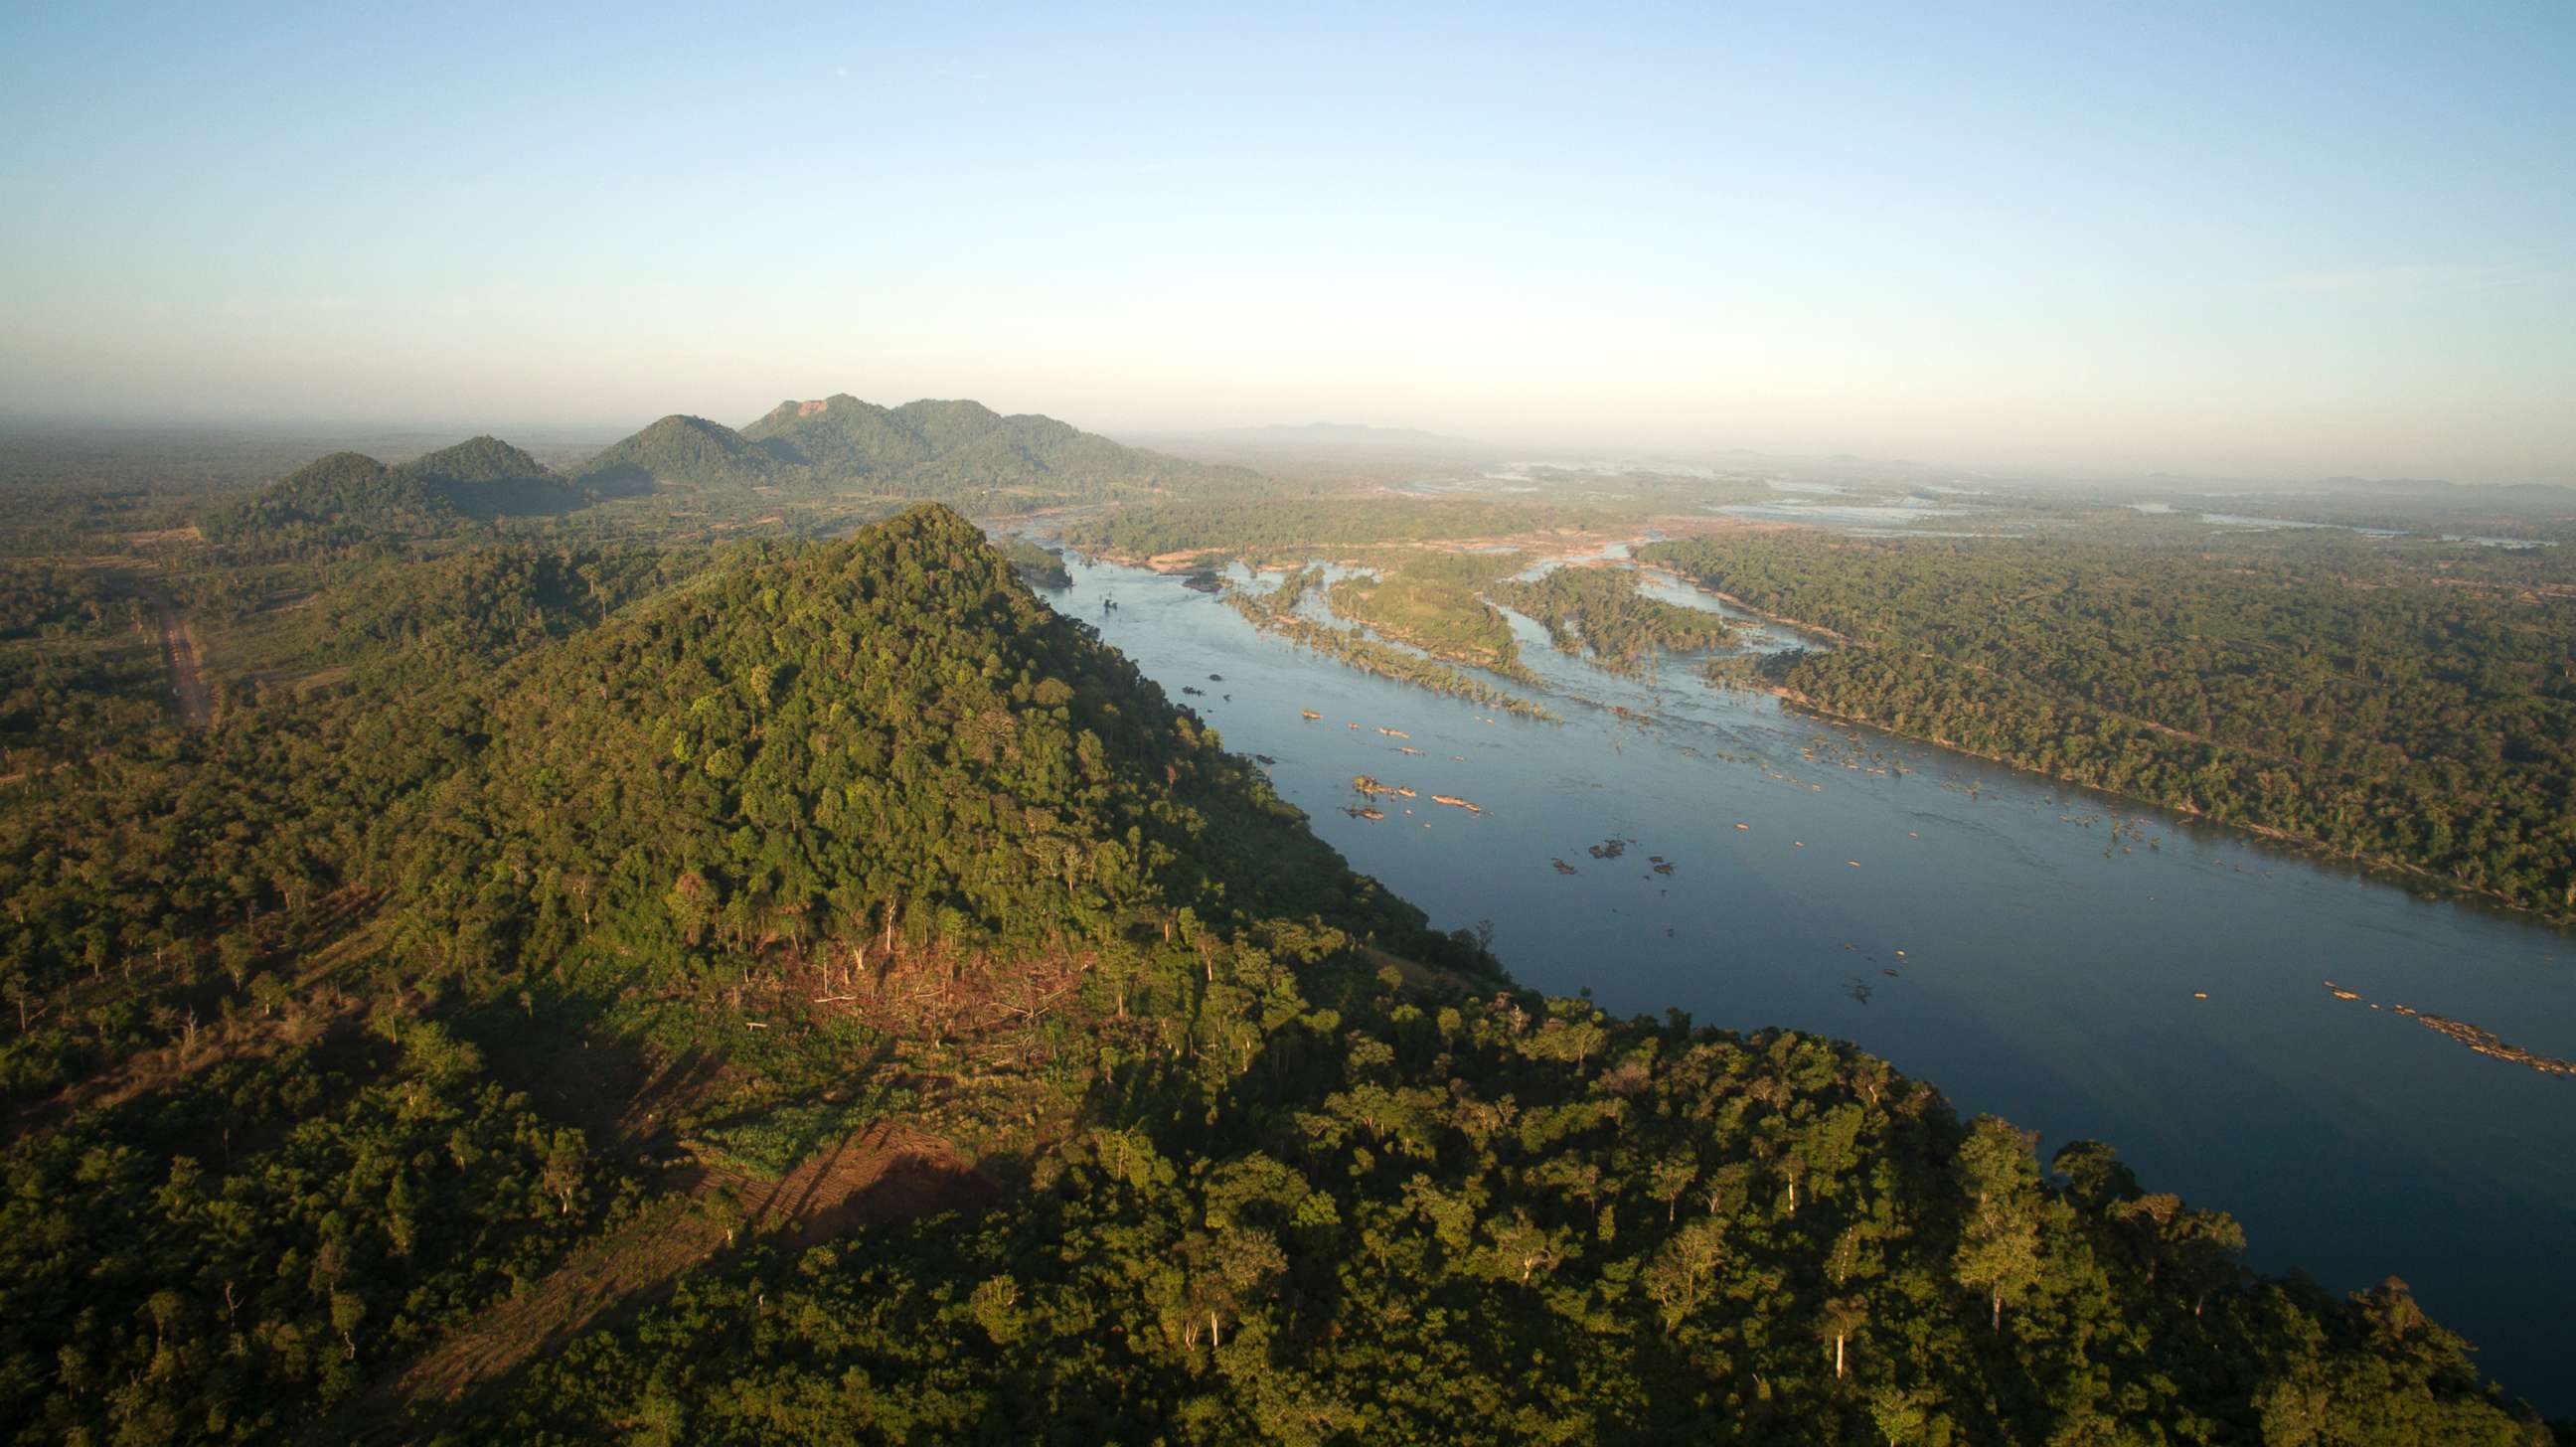 PHOTO: A view of the Mekong river valley in Cambodia.